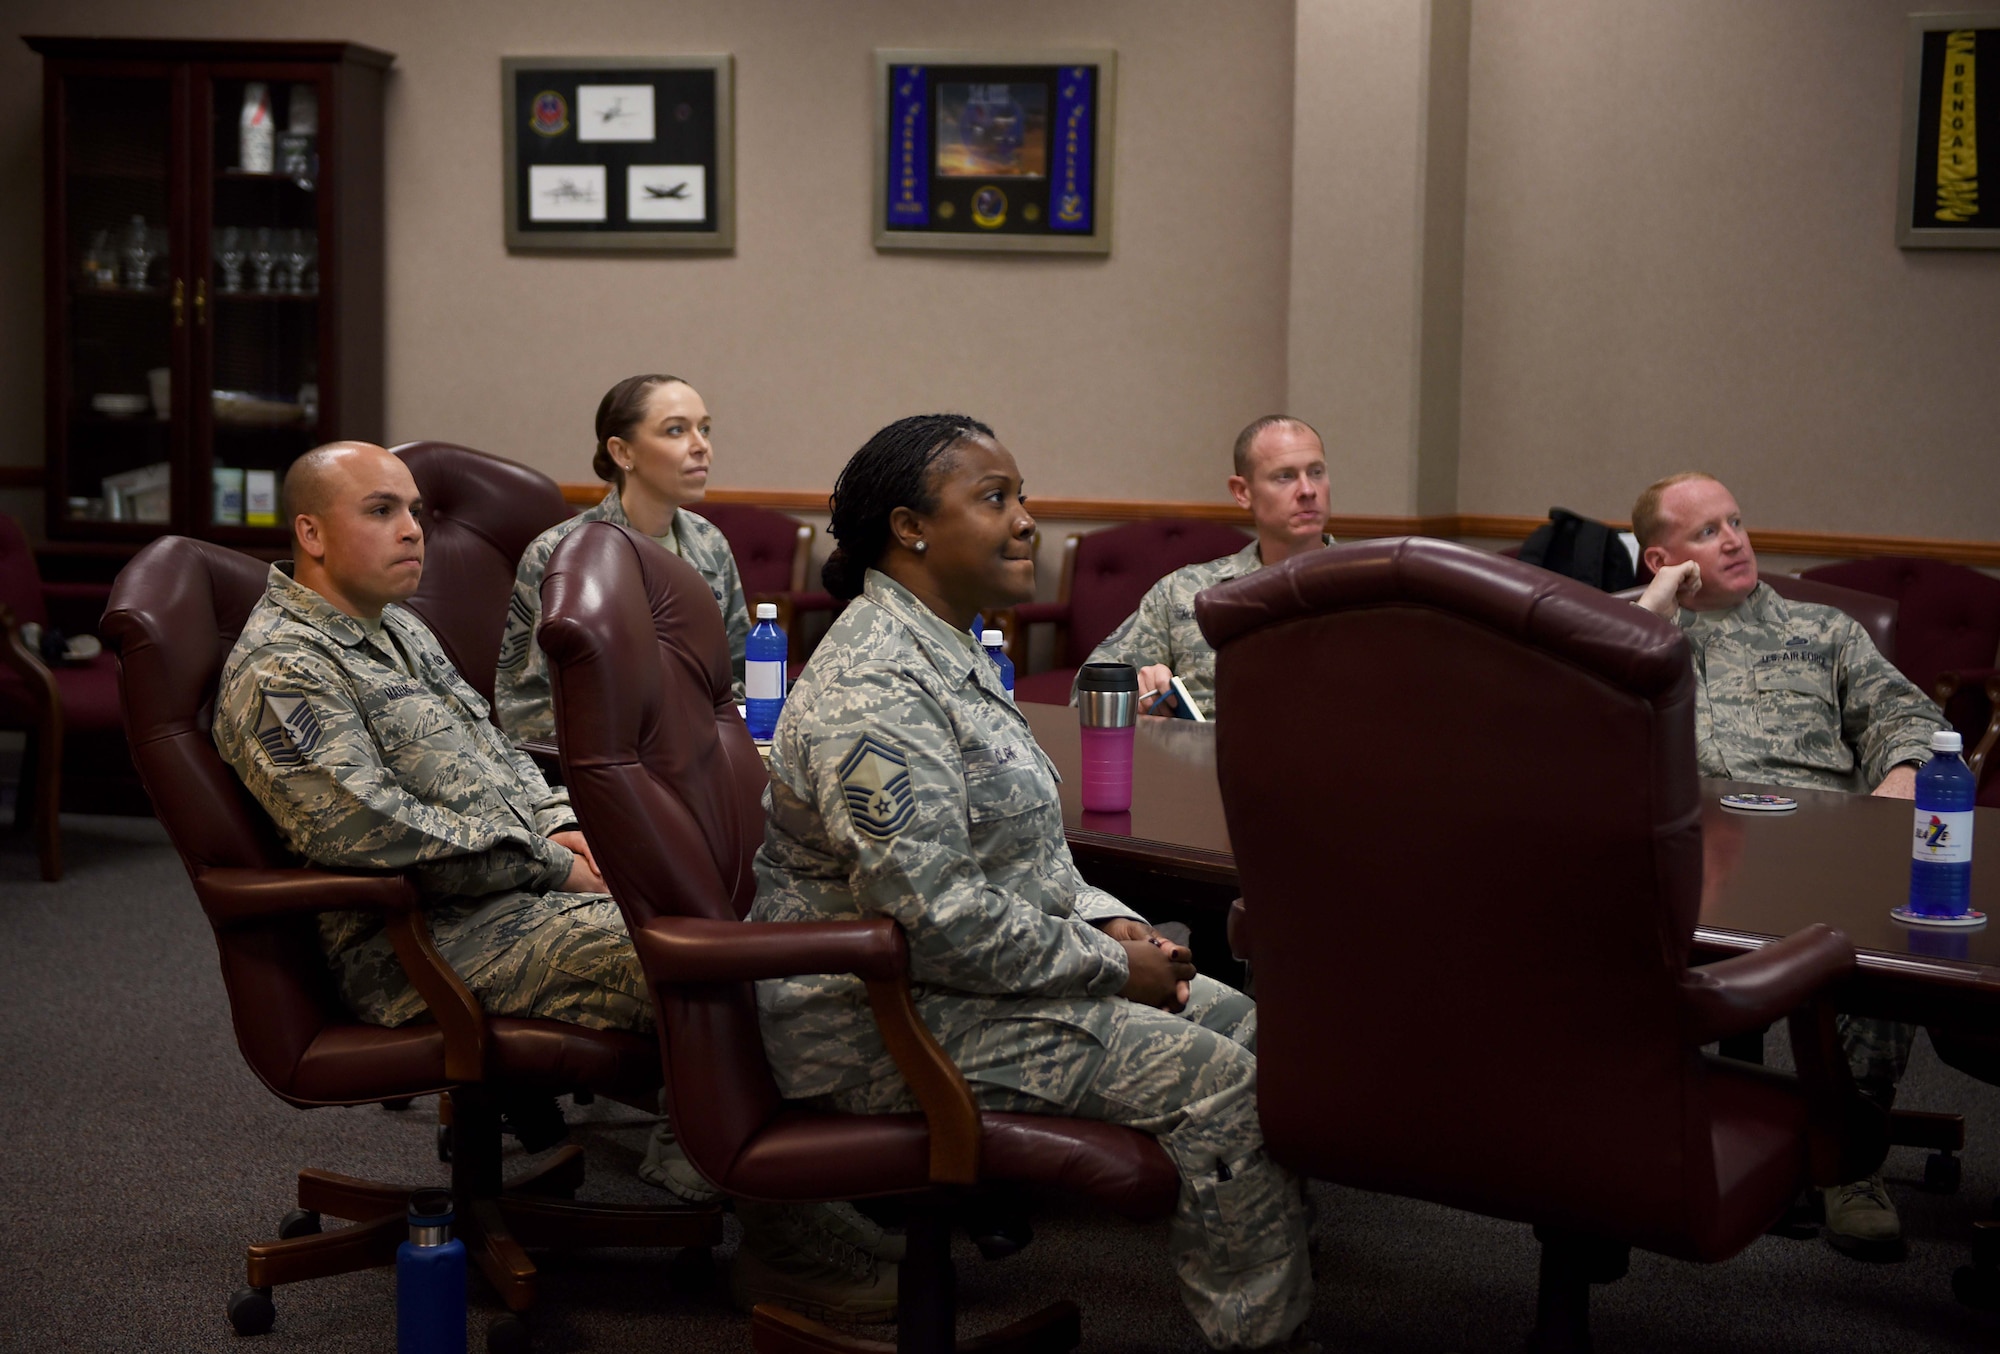 Senior enlisted leaders of the 14th Flying Training Wing and Chief Master Sgt. Juliet Gudgel, command chief of Air Education and Training Command, listen to the history of the pilot training base at Columbus Air Force Base, Mississippi, June 21, 2018. During Gudgel’s visit to Columbus AFB, she toured the Air Traffic Control tower and met with one of the 2018 Outstanding Airman of the Year award recipients. (U.S Air Force photo by Airman 1st Class Keith Holcomb)